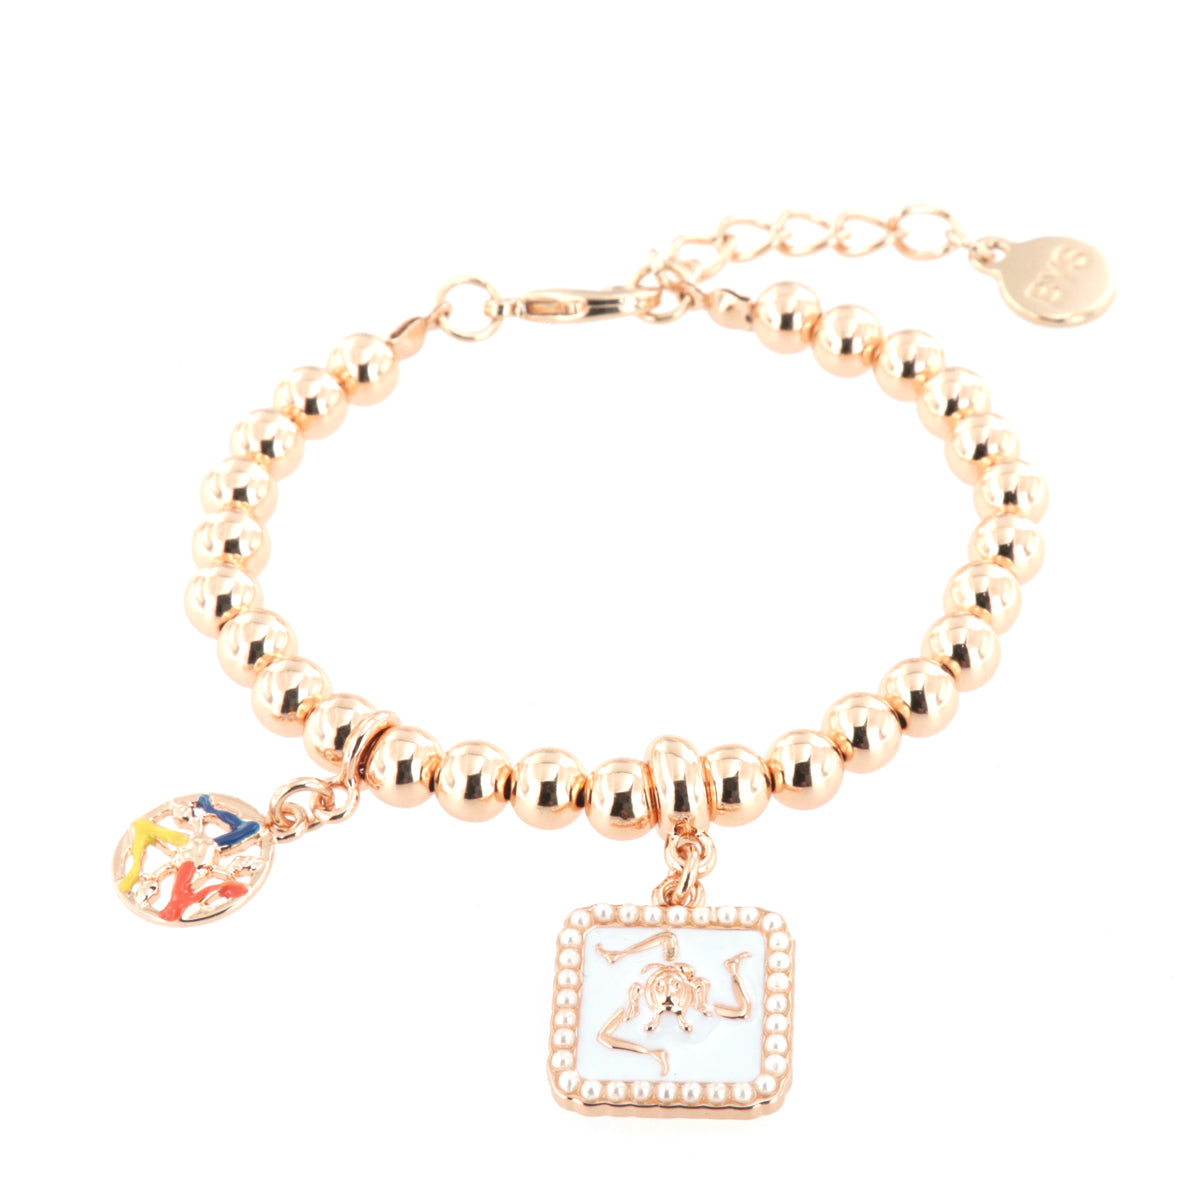 Metal bracelet of ball jersey with pendant tile embellished with Sicilian Trinacria and white enamel